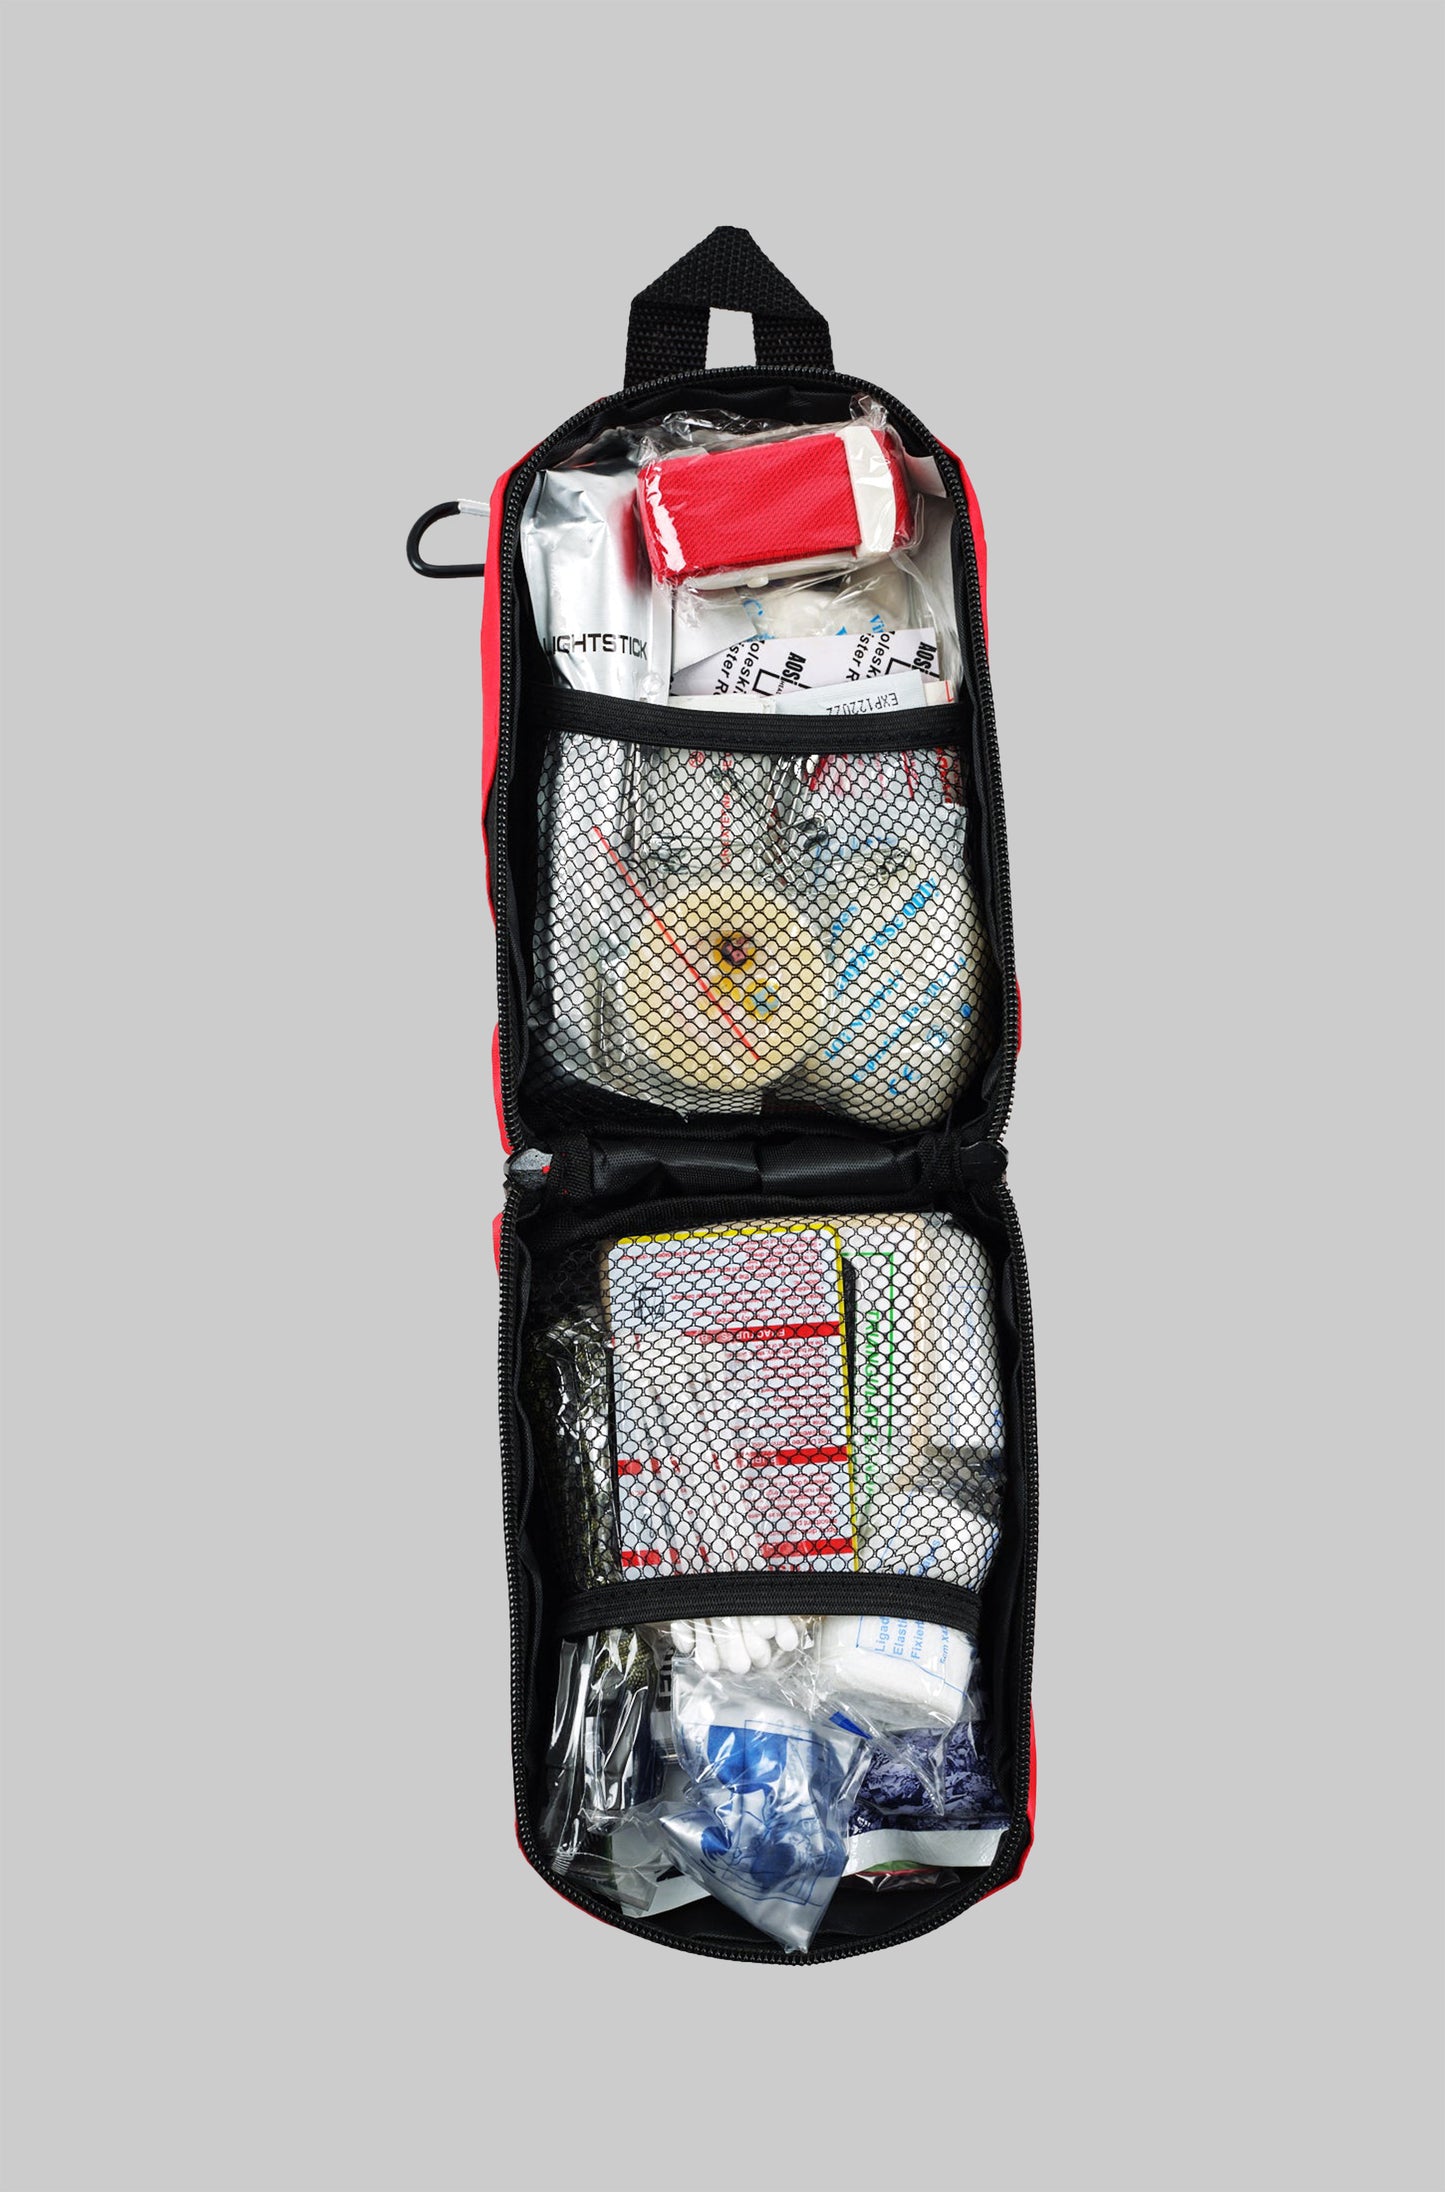 COMPACT 130 PIECE FIRST AID KIT